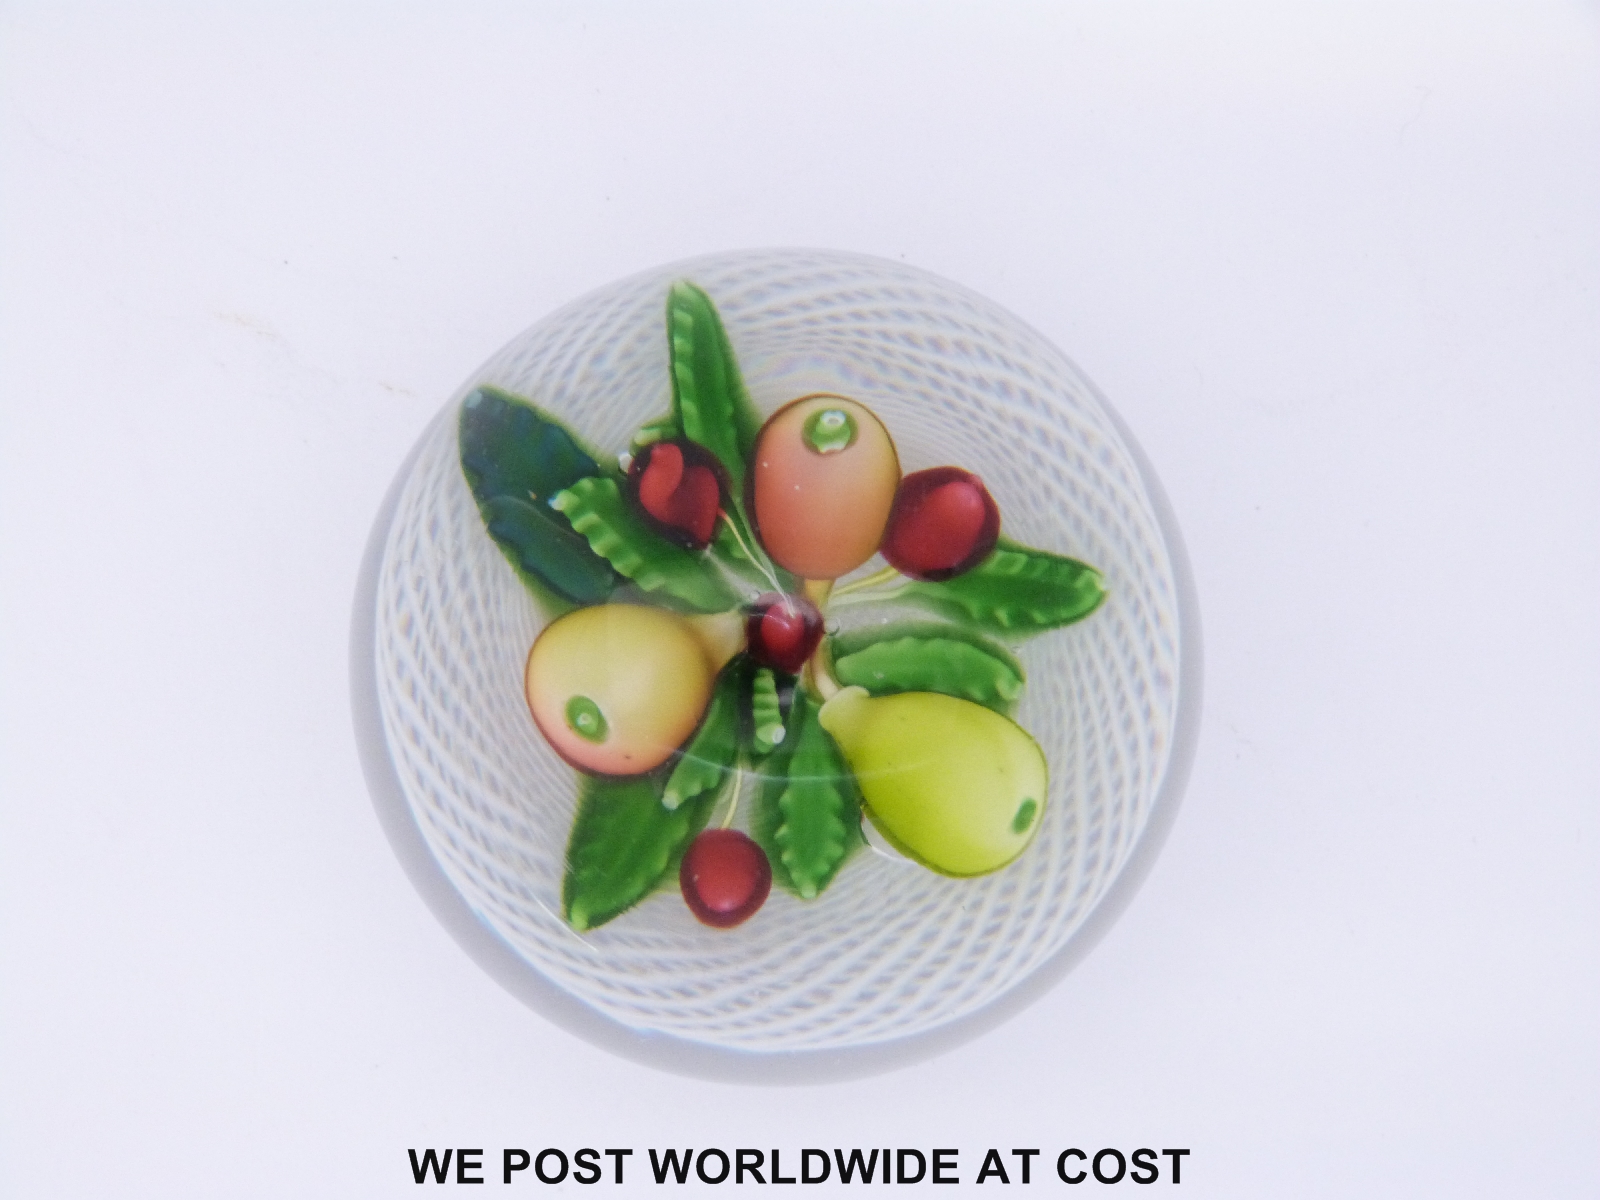 St Louis fruit basket glass paperweight with three pears and four cherries amongst leaves on a